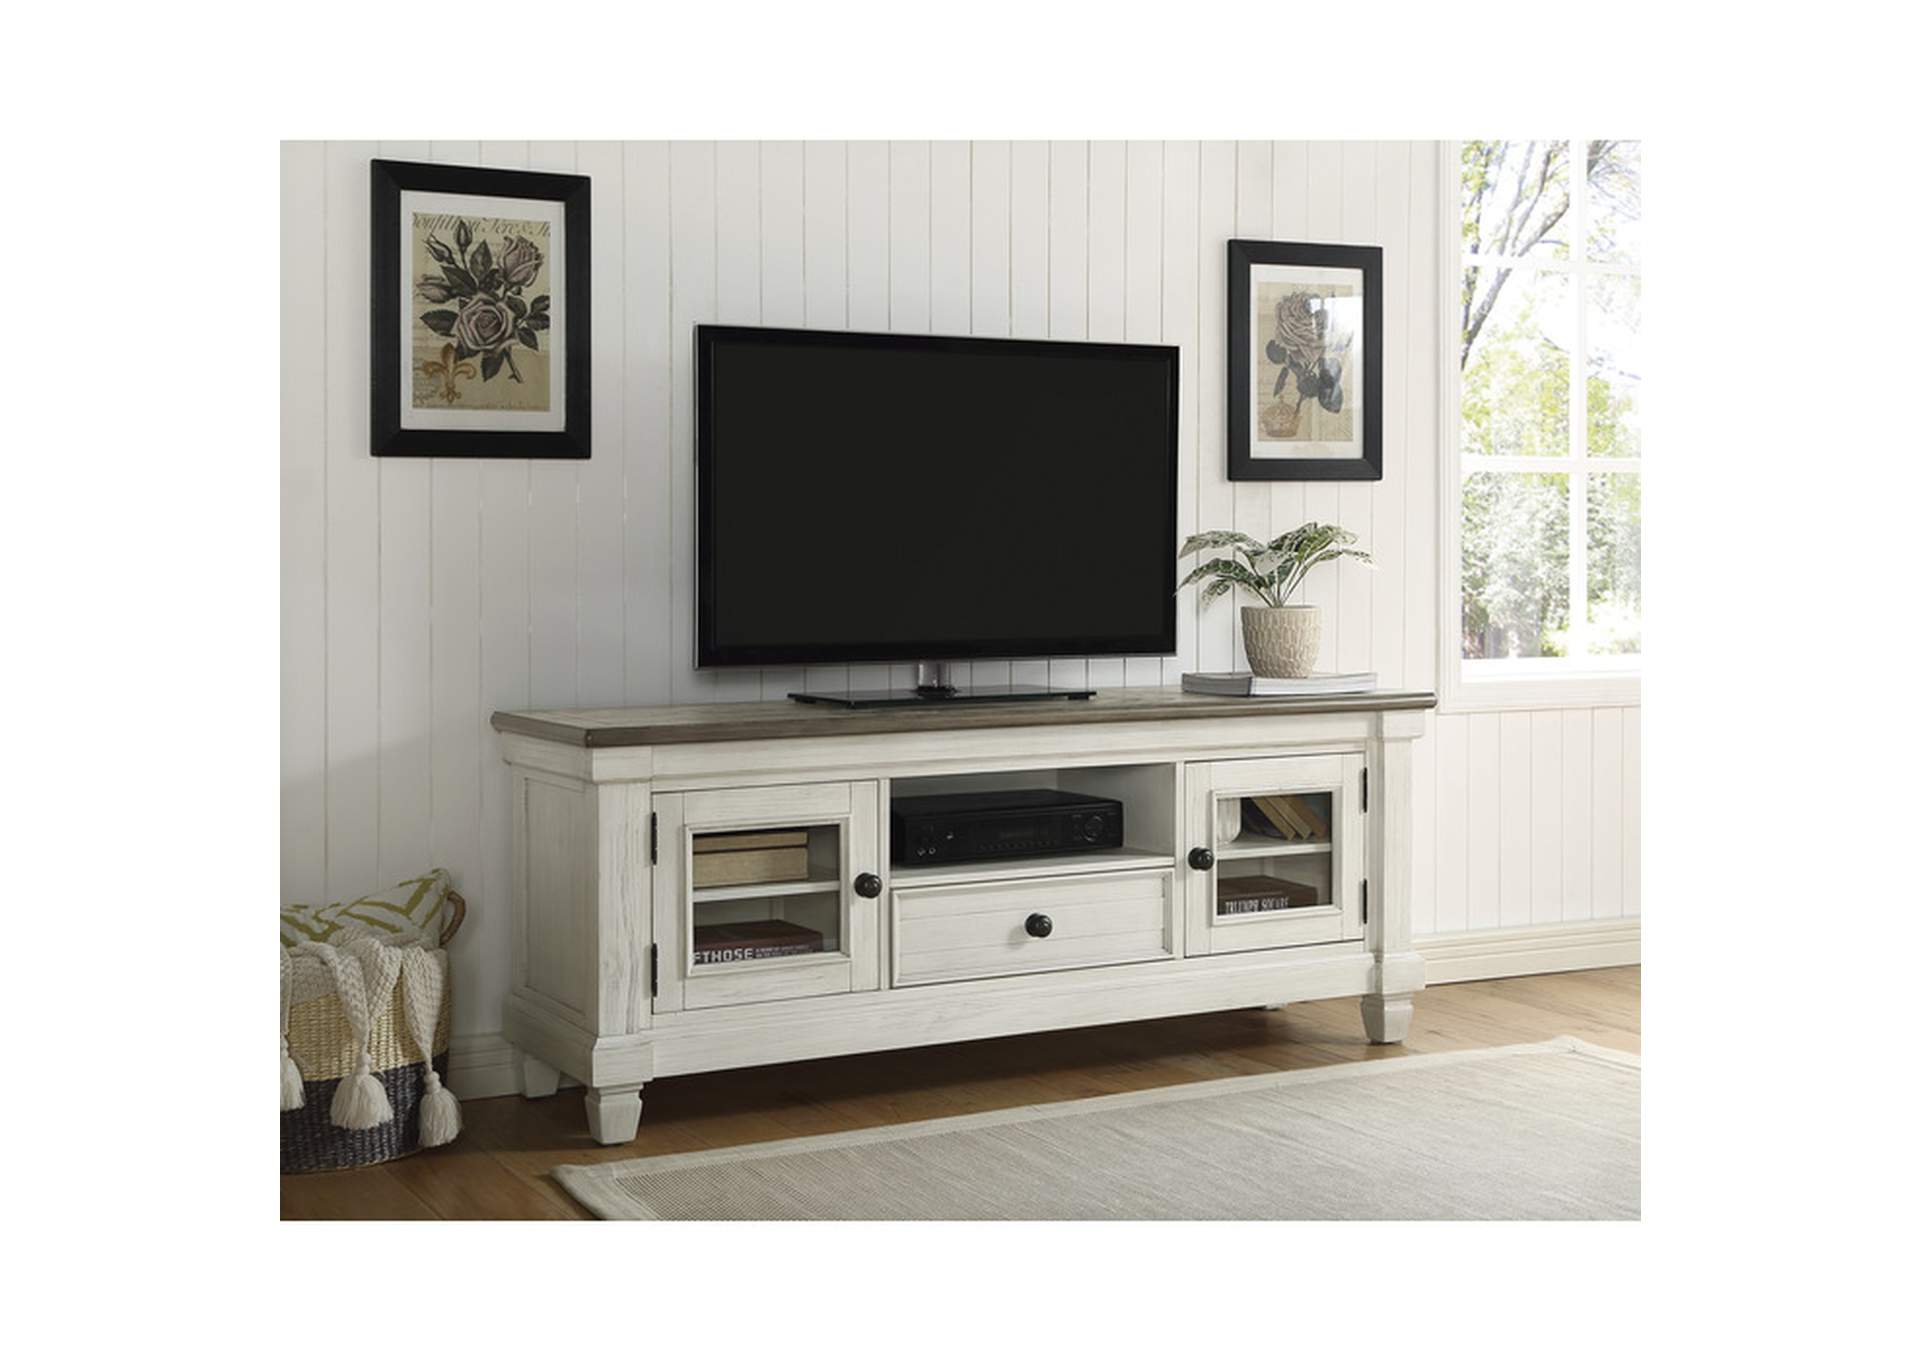 Granby TV Stand,Homelegance